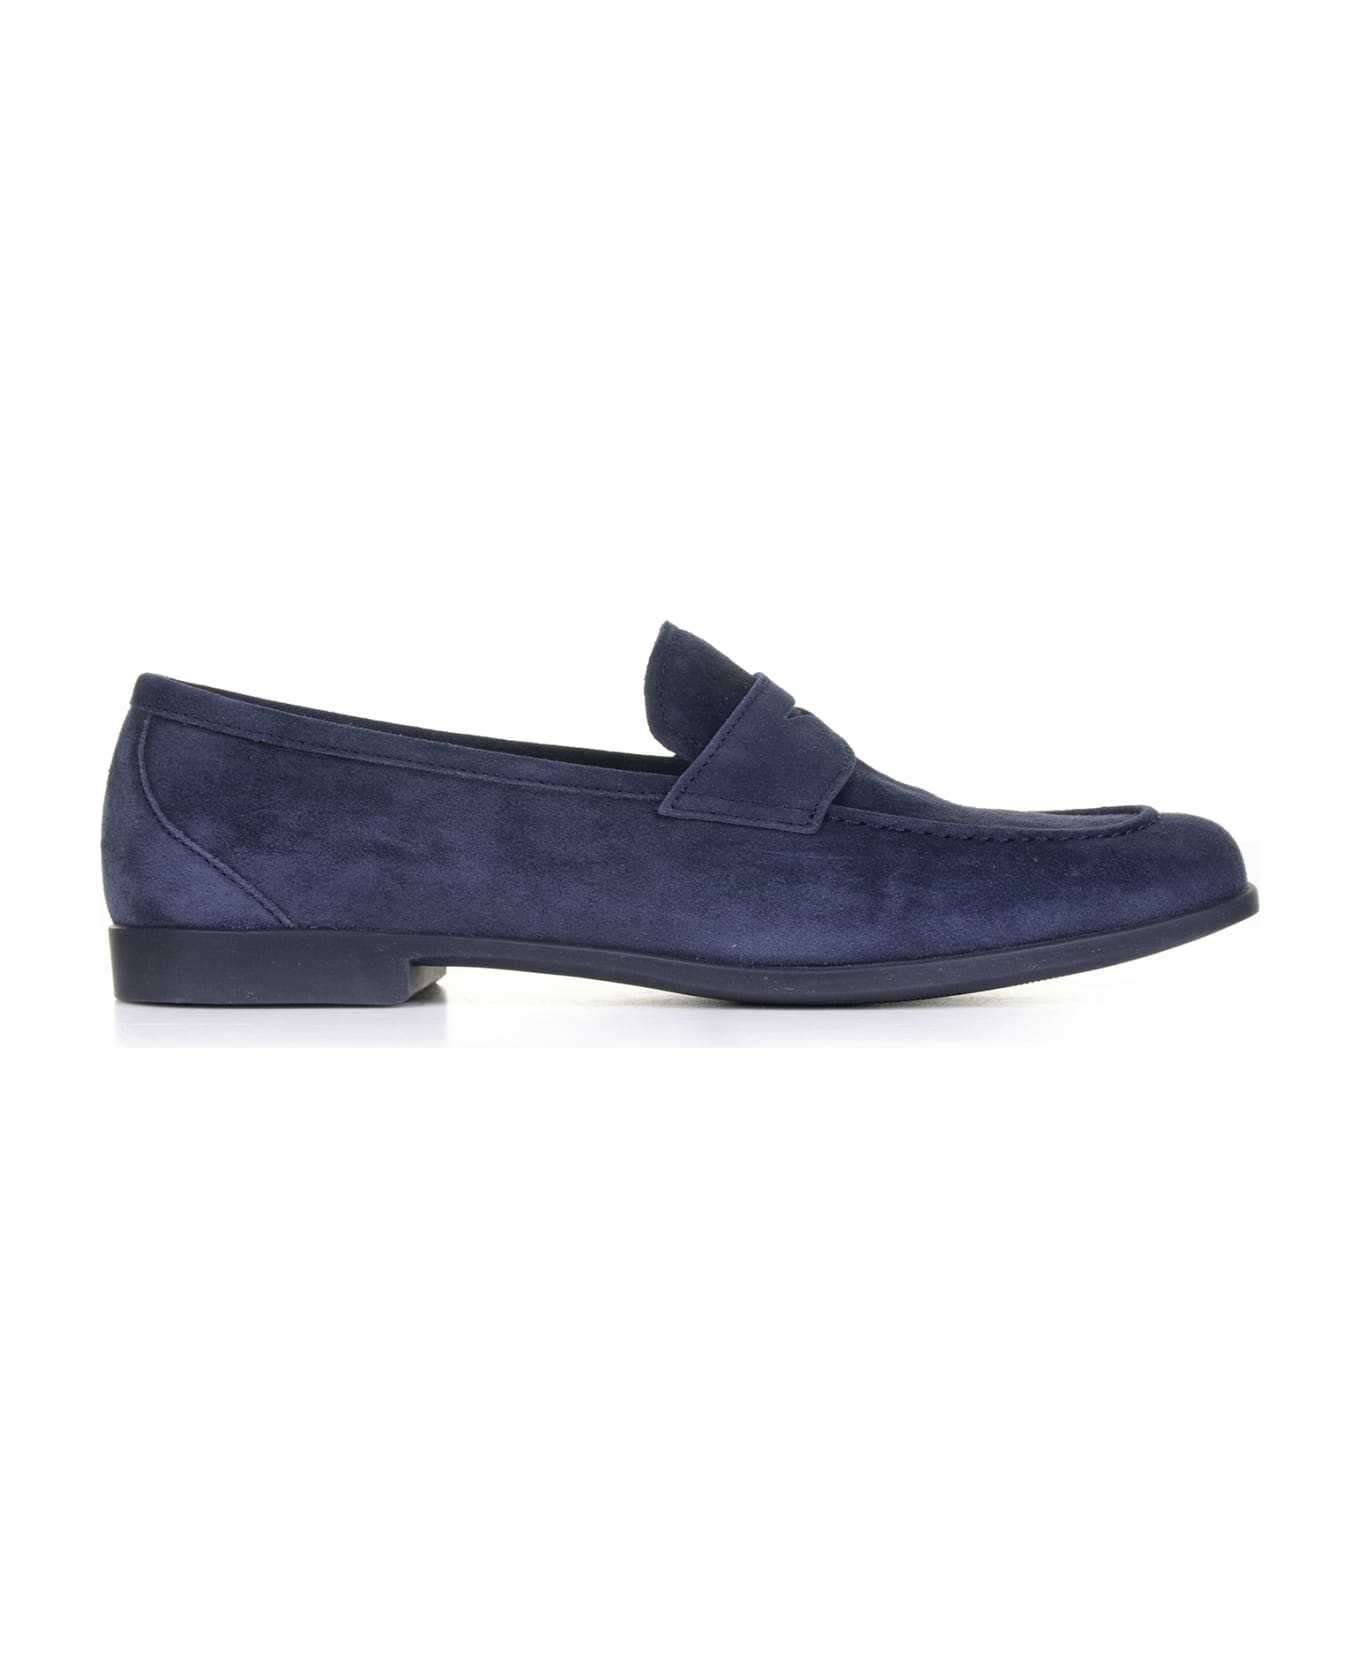 Fratelli Rossetti One Blue Suede Loafer - NAVY